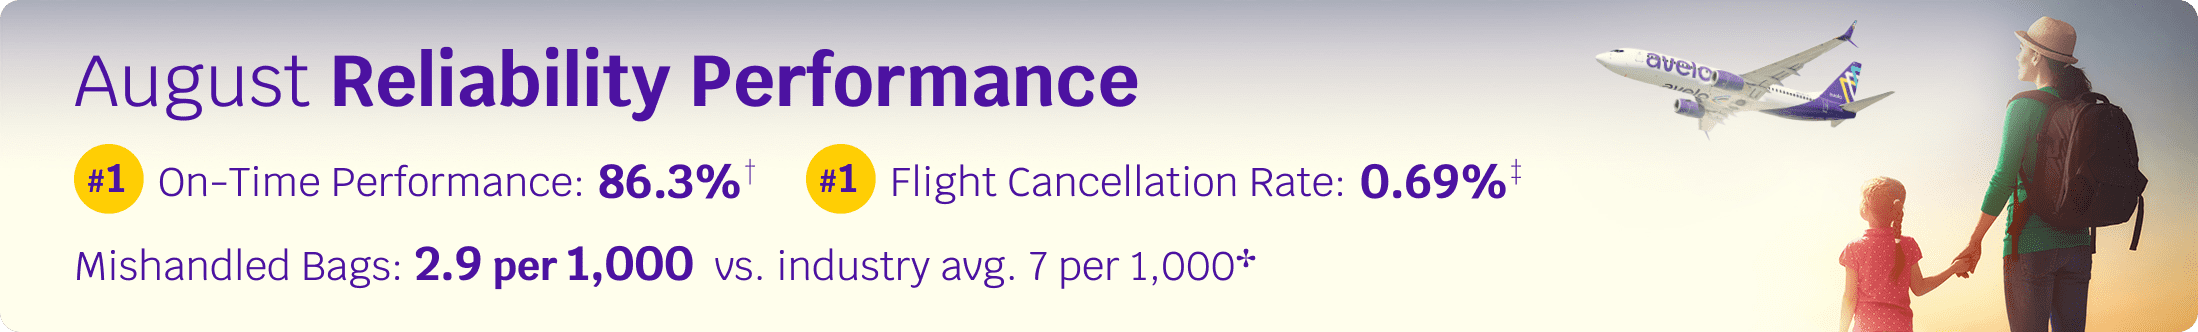 On time performance 86.3% | Cancellation rate 0.69% | Mishandled bag 2.9 per 1000